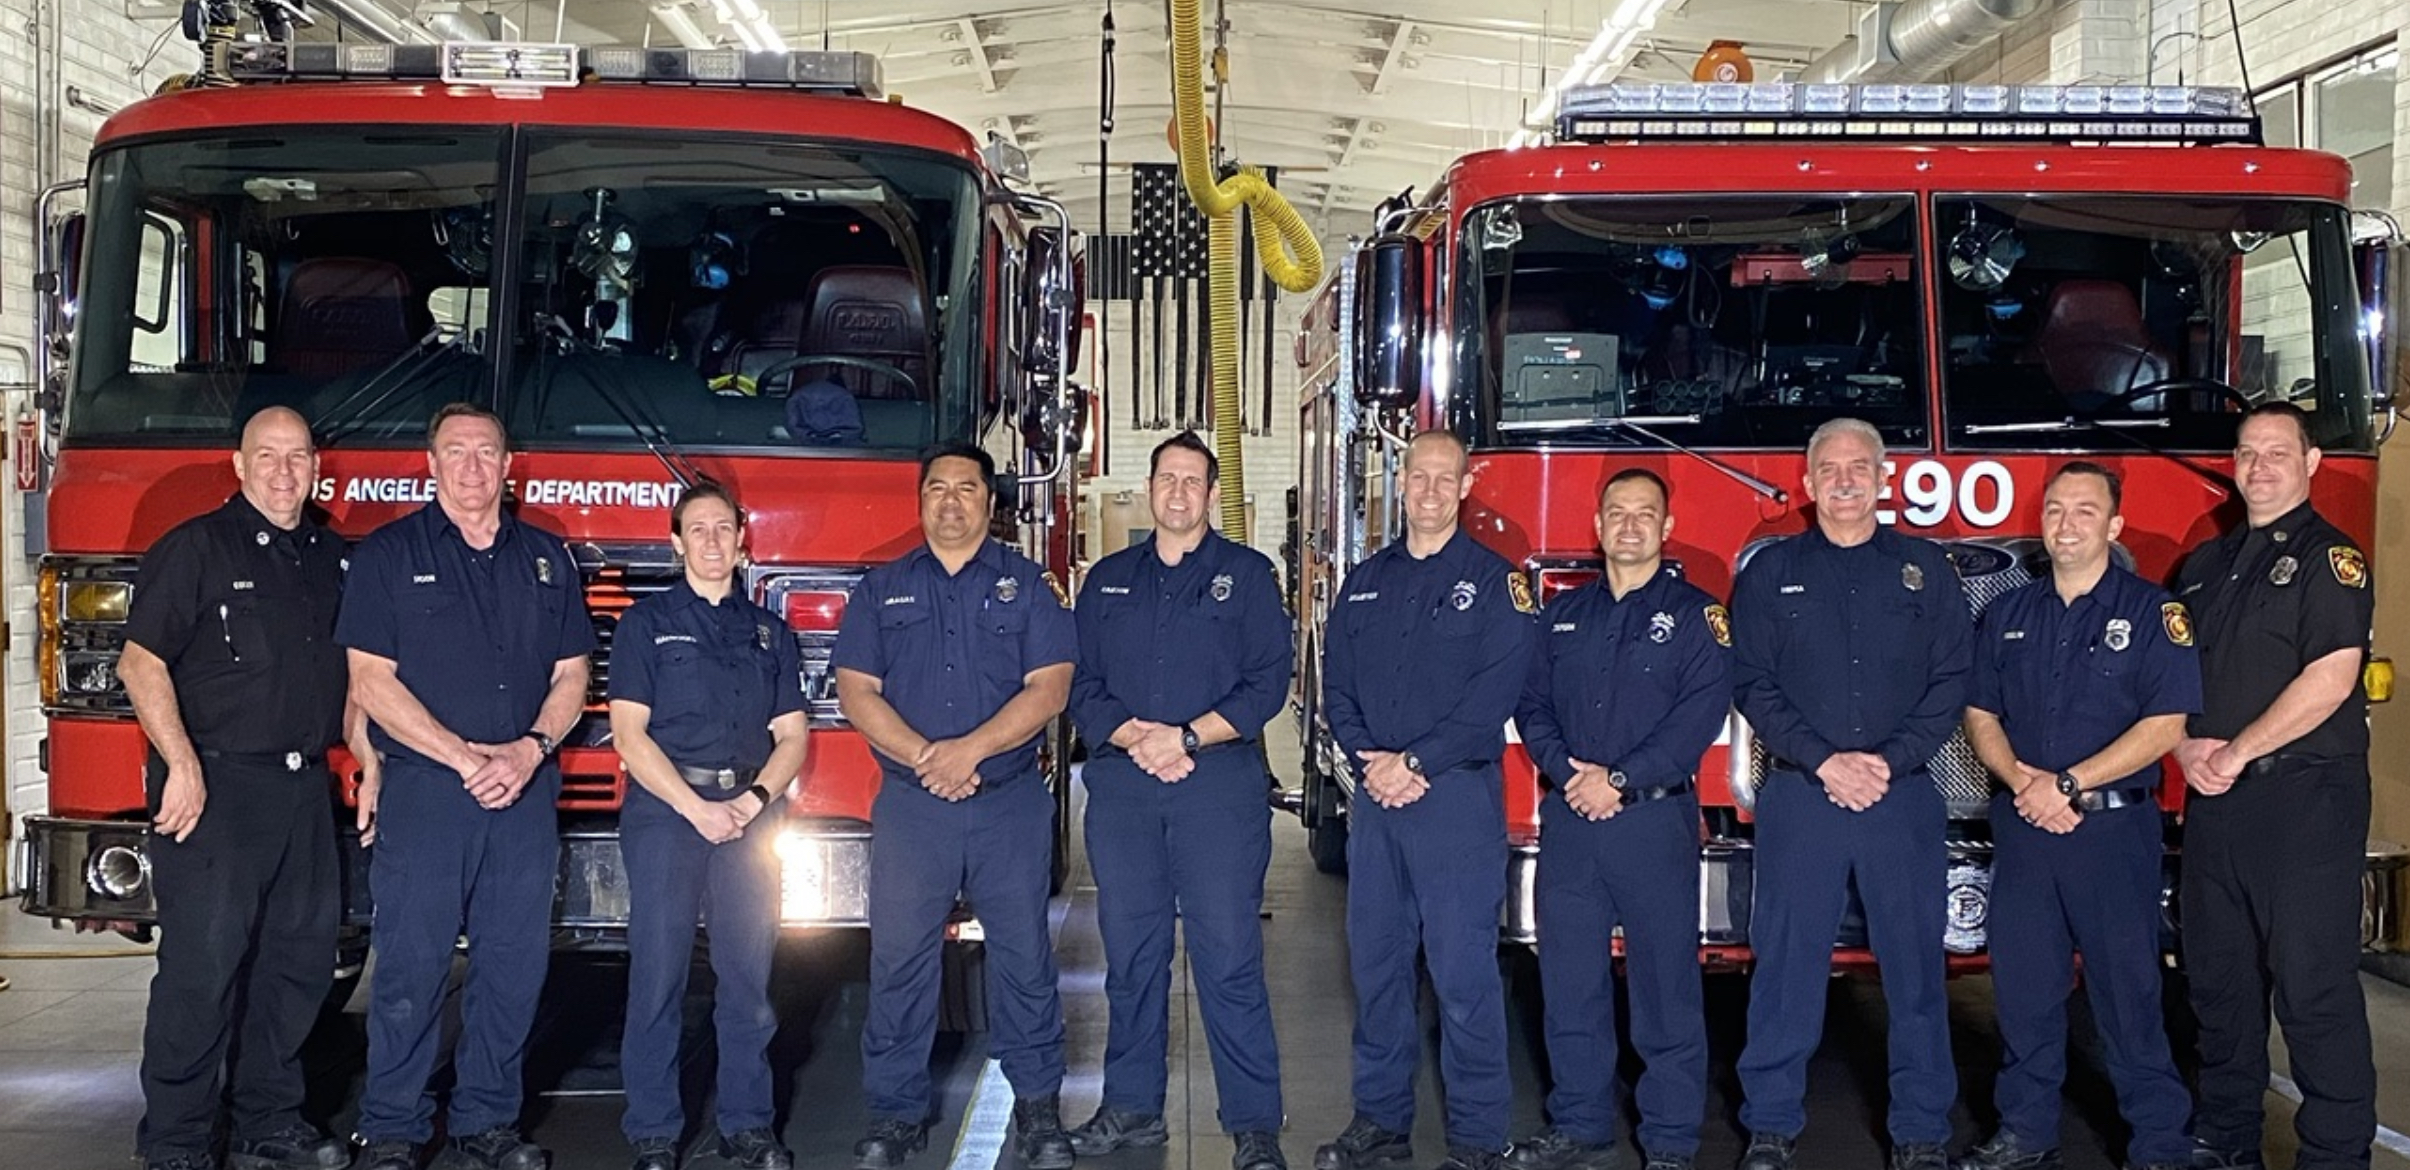 Station members standing with Captain Egizi